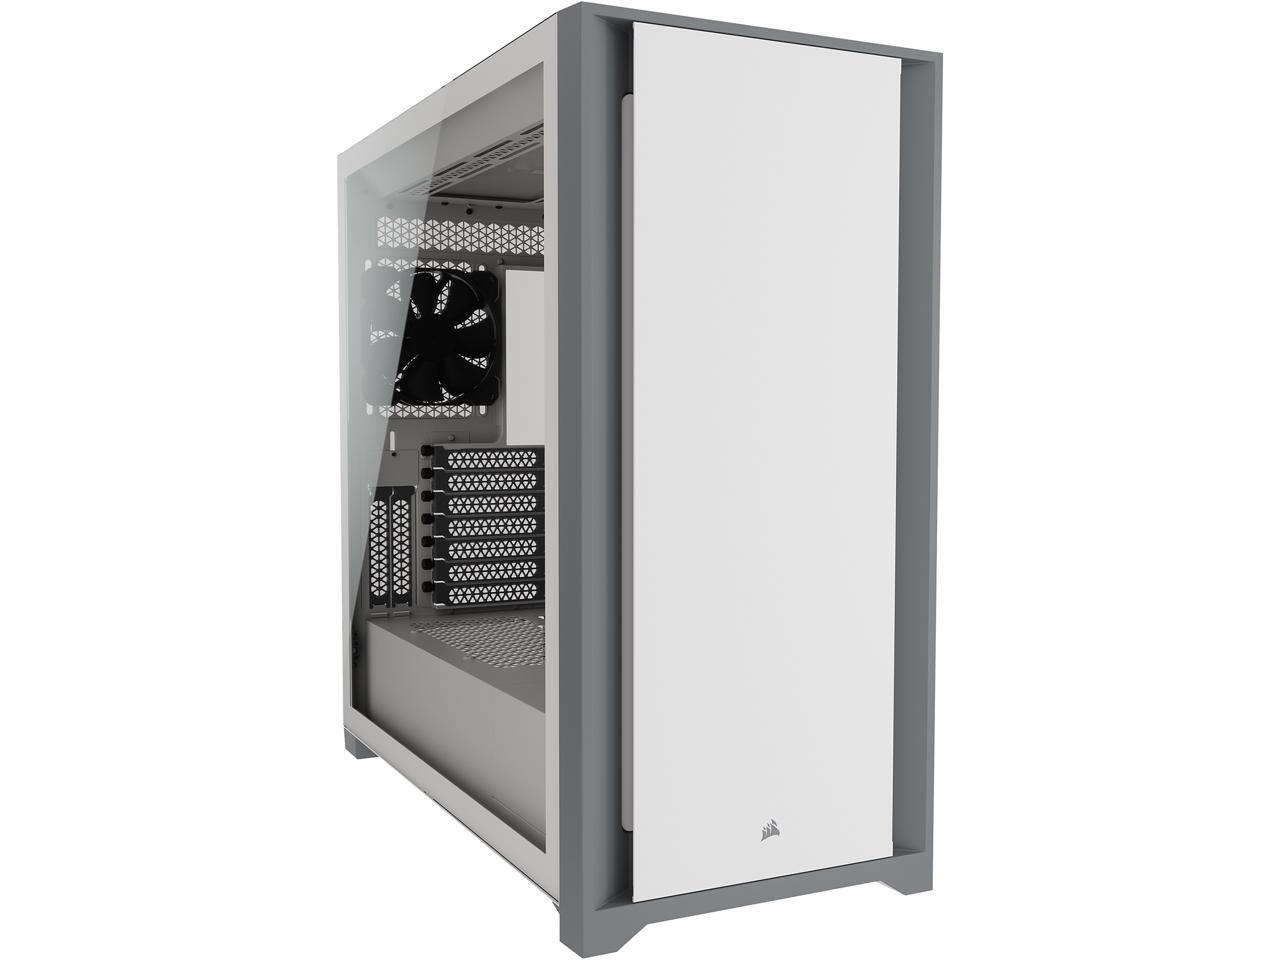 CORSAIR 5000D Tempered Glass Mid-Tower ATX PC Case (White) $85.49 after rebate + Free Ship